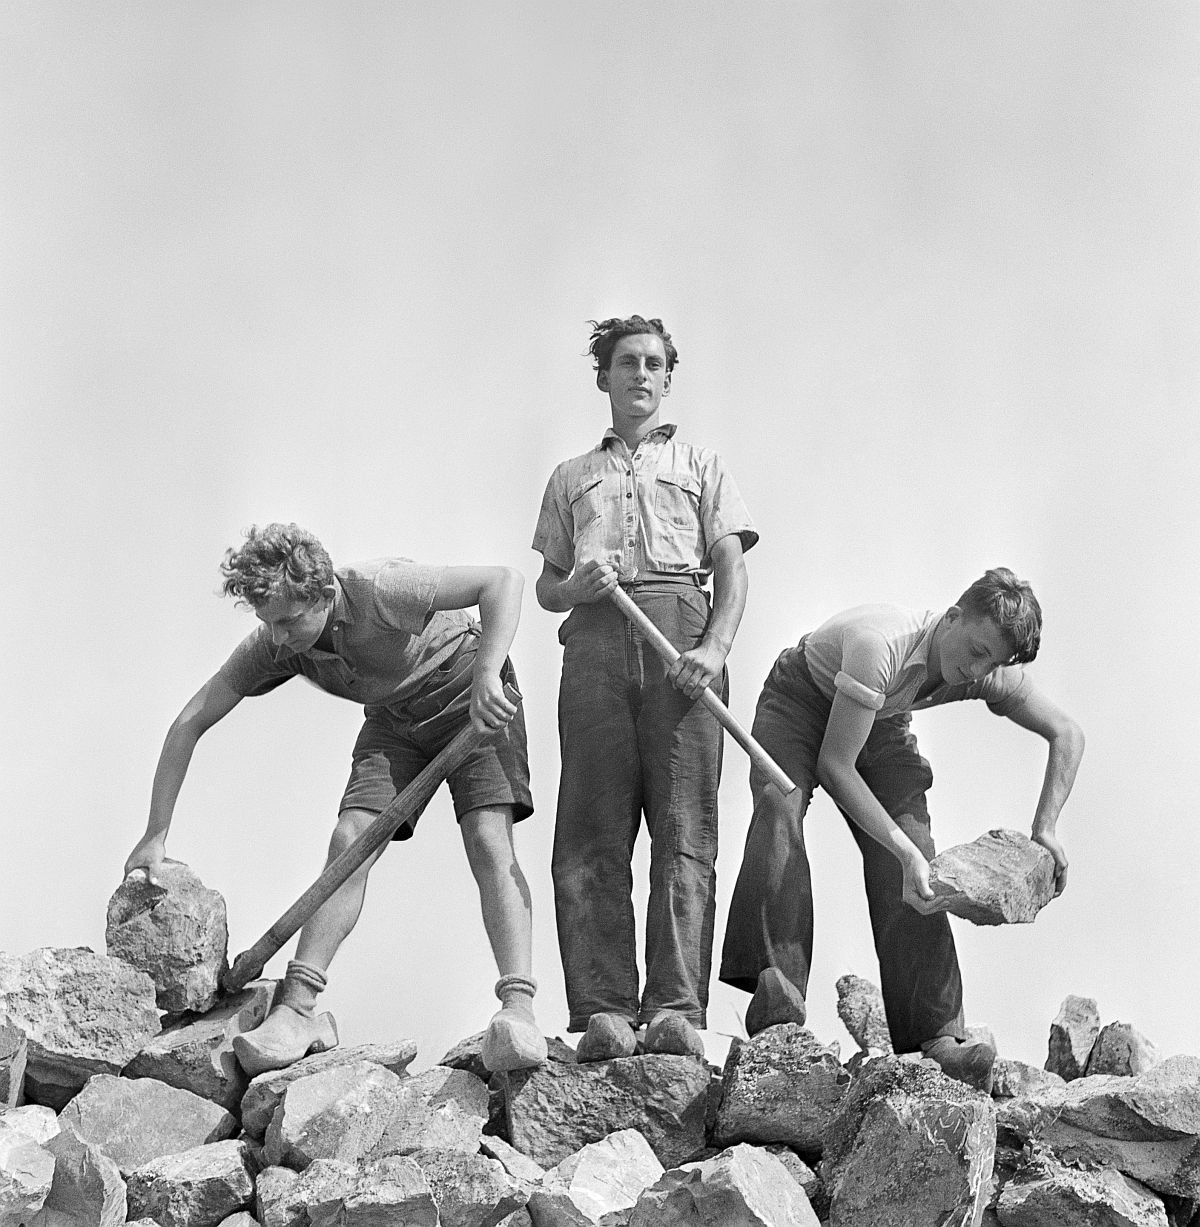 Roman Vishniac, [Ernst Kaufmann, center, and unidentified Zionist youth, wearing clogs while learning construction techniques in a quarry, Werkdorp Nieuwesluis, Wieringermeer, The Netherlands], 1939. Ink-jet print. © Mara Vishniac Kohn, courtesy International Center of Photography.